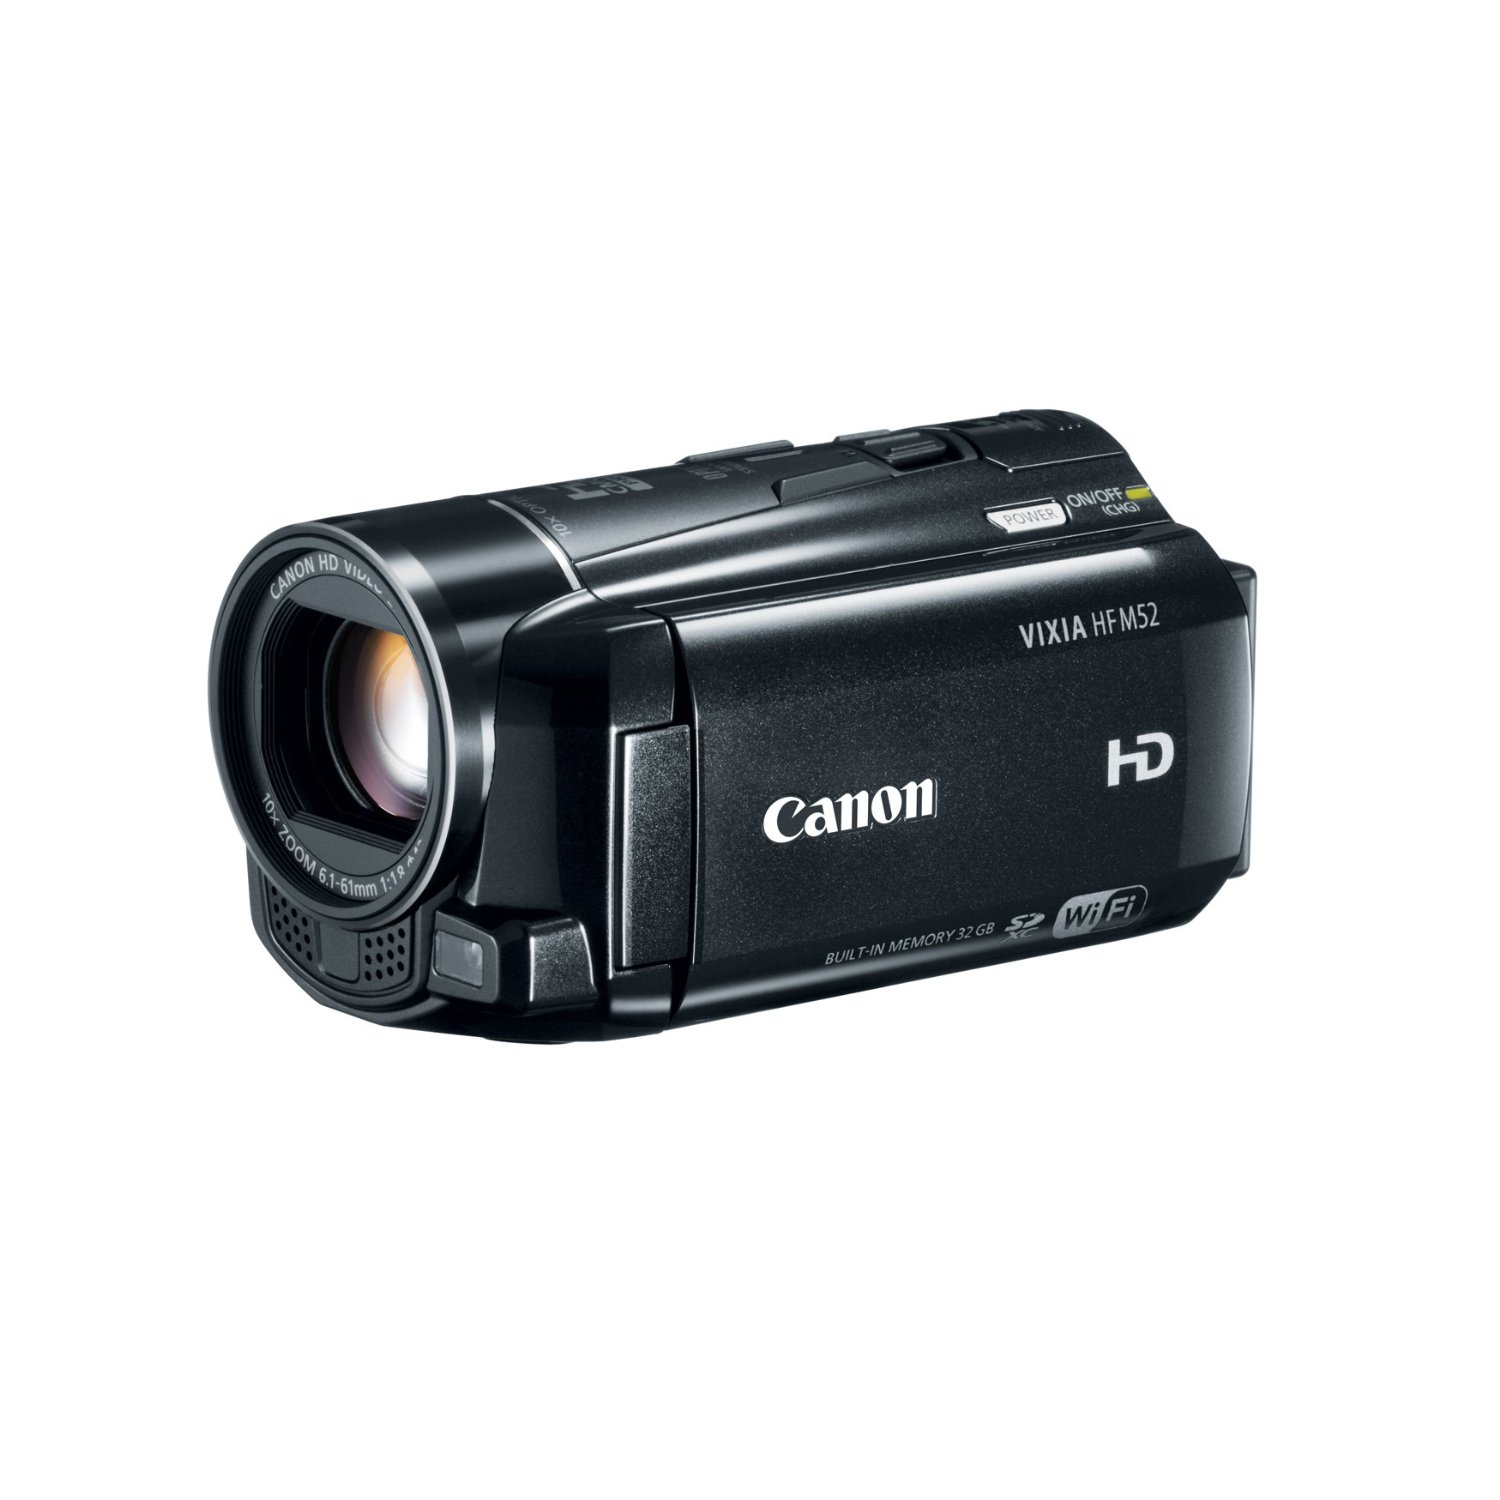 http://thetechjournal.com/wp-content/uploads/images/1204/1334815378-canon-vixia-hf-m52-full-hd-10x-image-stabilize-camcorder-1.jpg